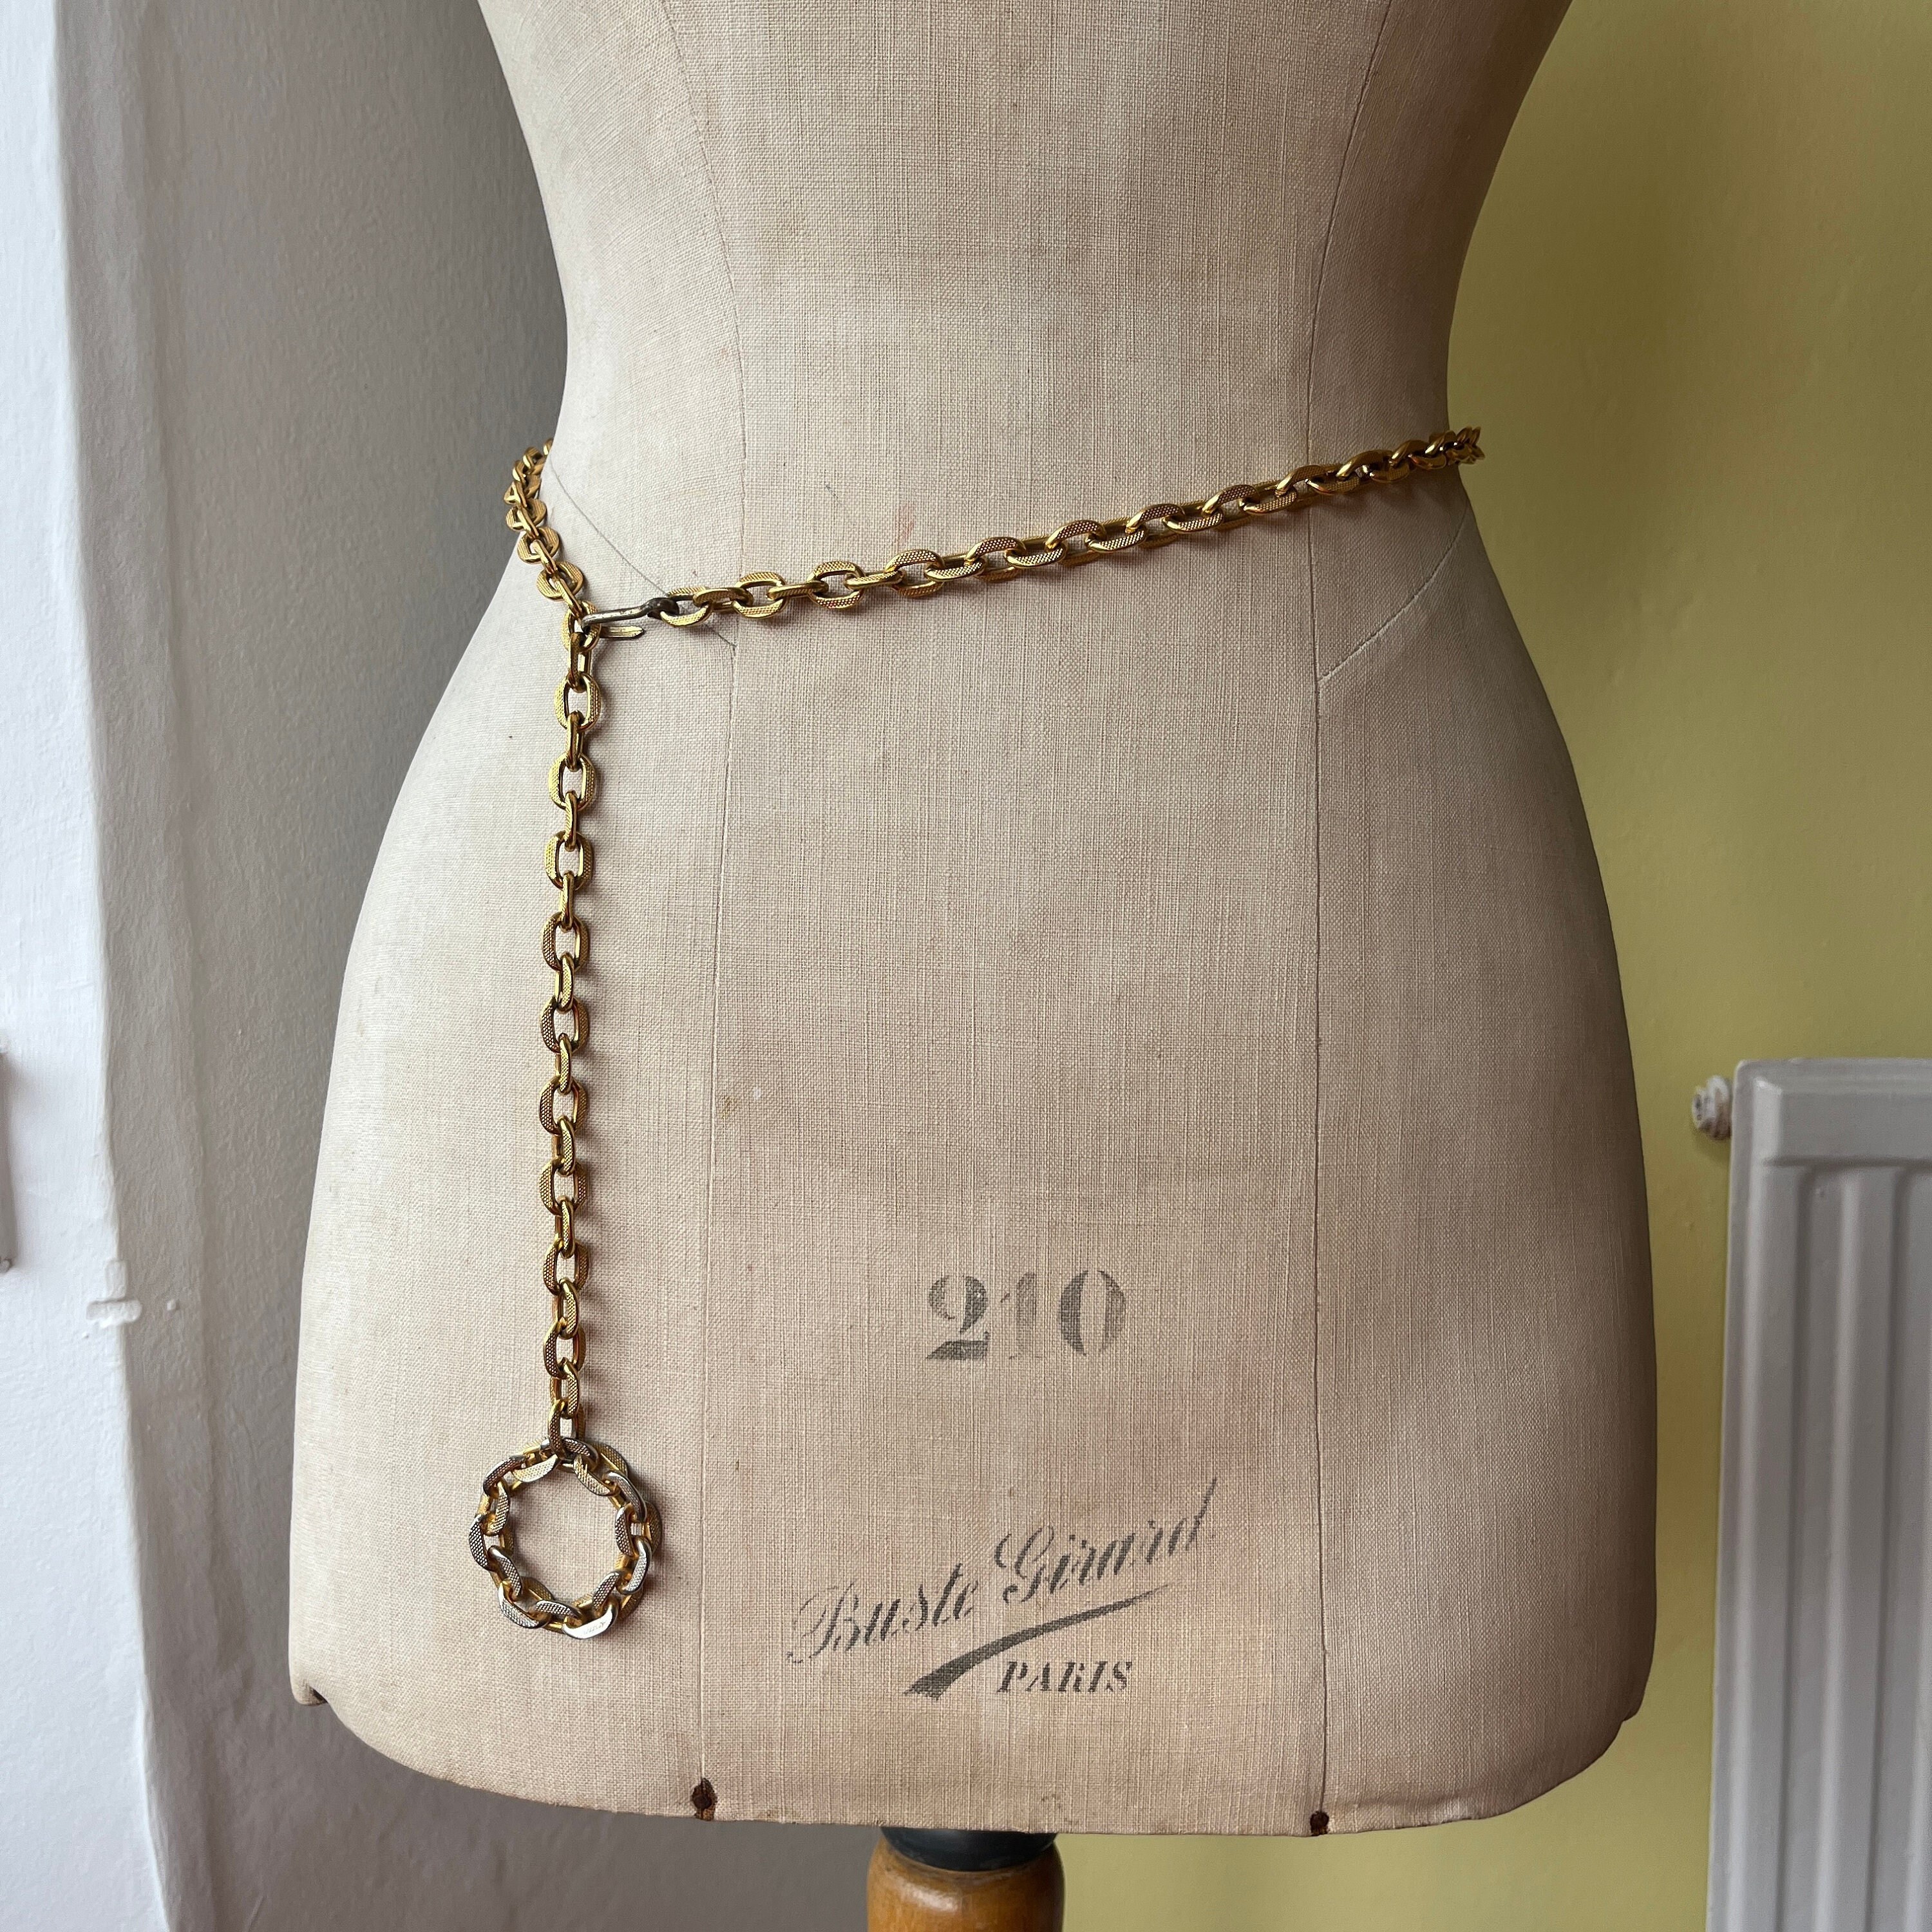 CHANEL Belt Gold Chain Links Gripoix Charms Circa 1970-80s